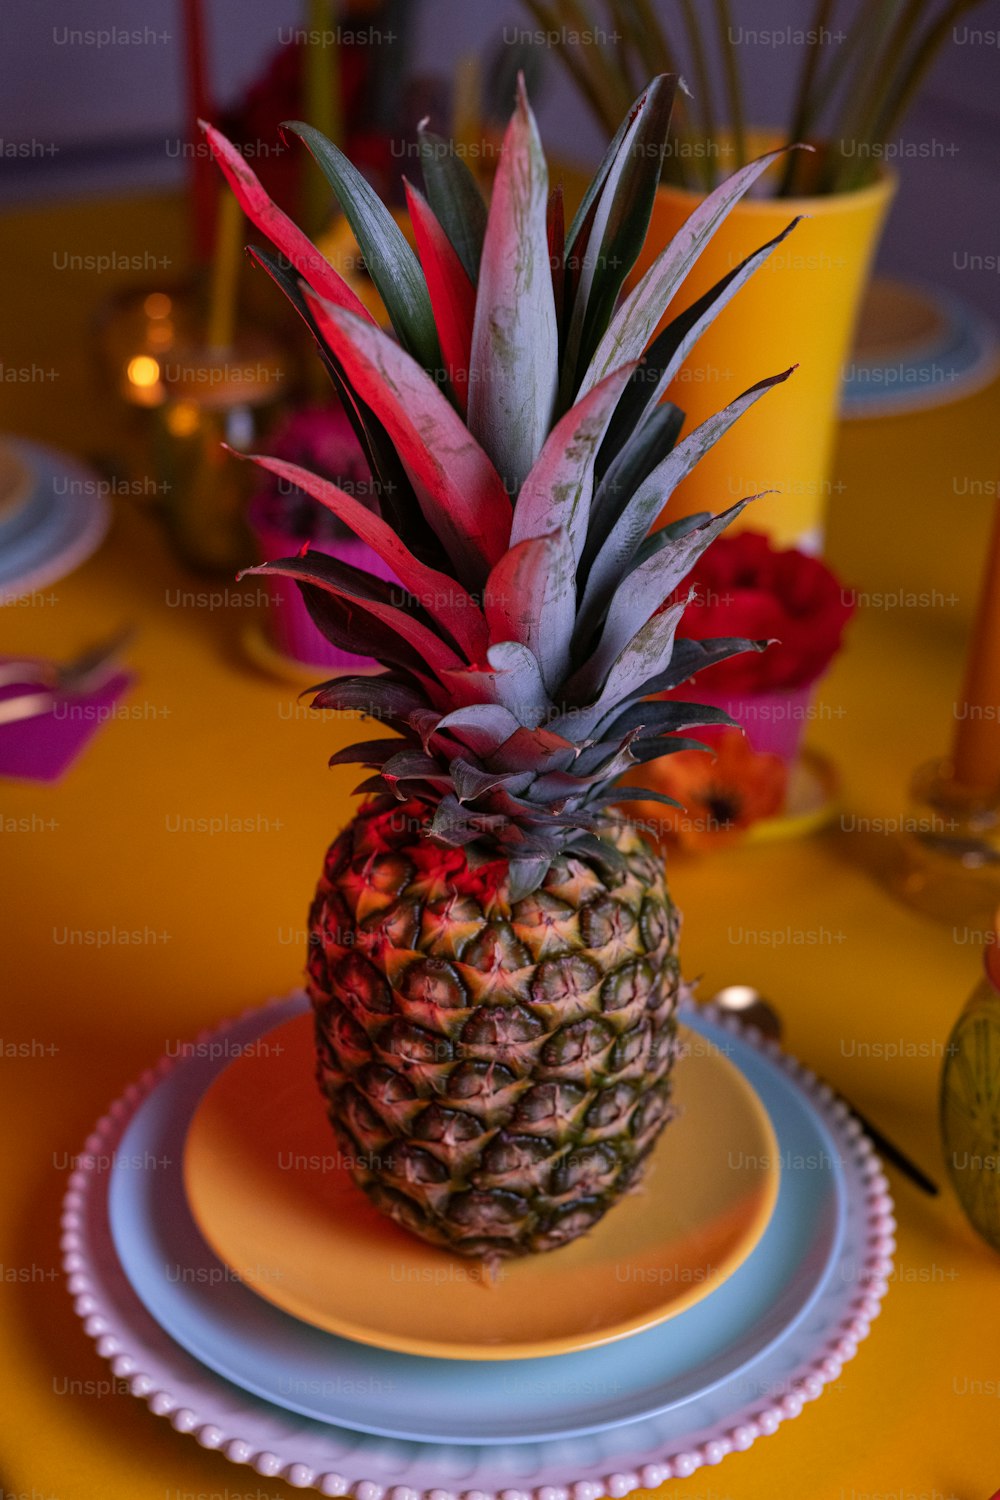 a pineapple sitting on a plate on a table